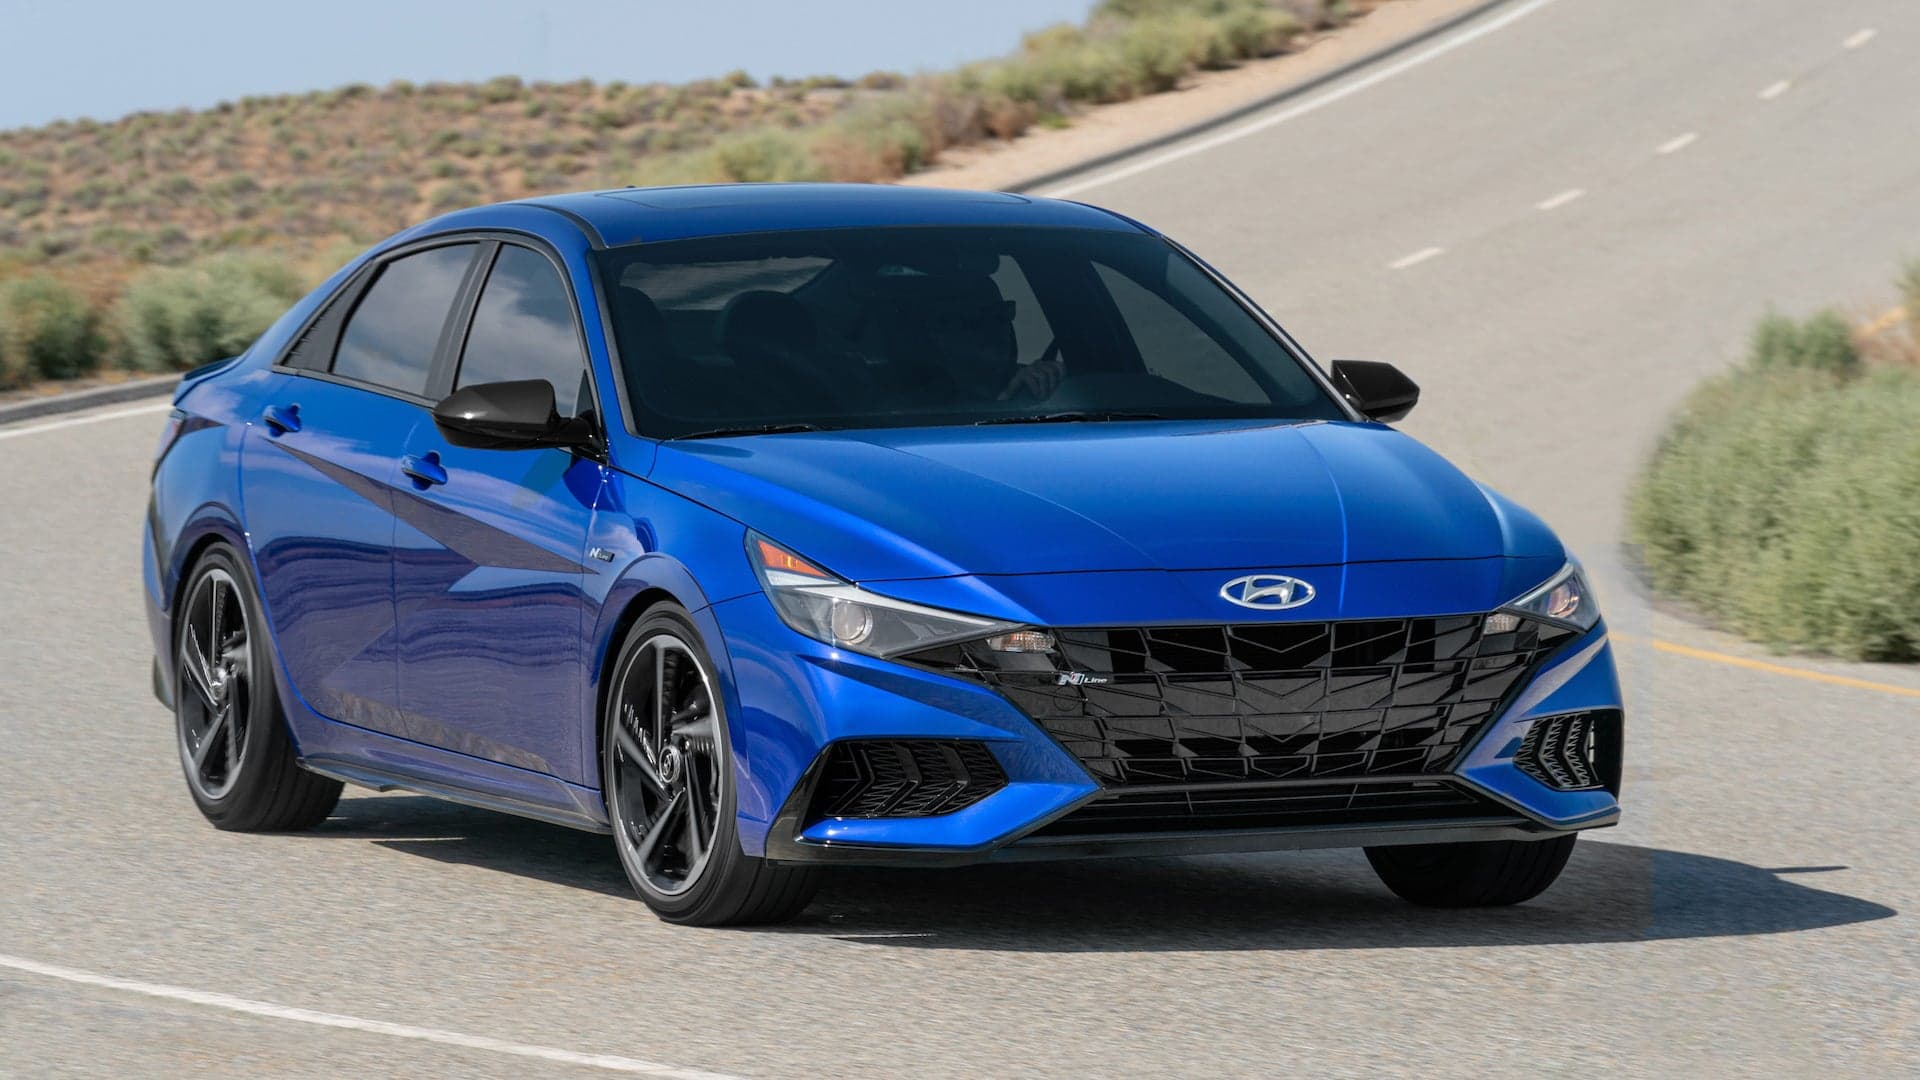 The 2021 Hyundai Elantra N Line: Can’t Go Wrong with a 201-HP, Stick-Shift Economy Car